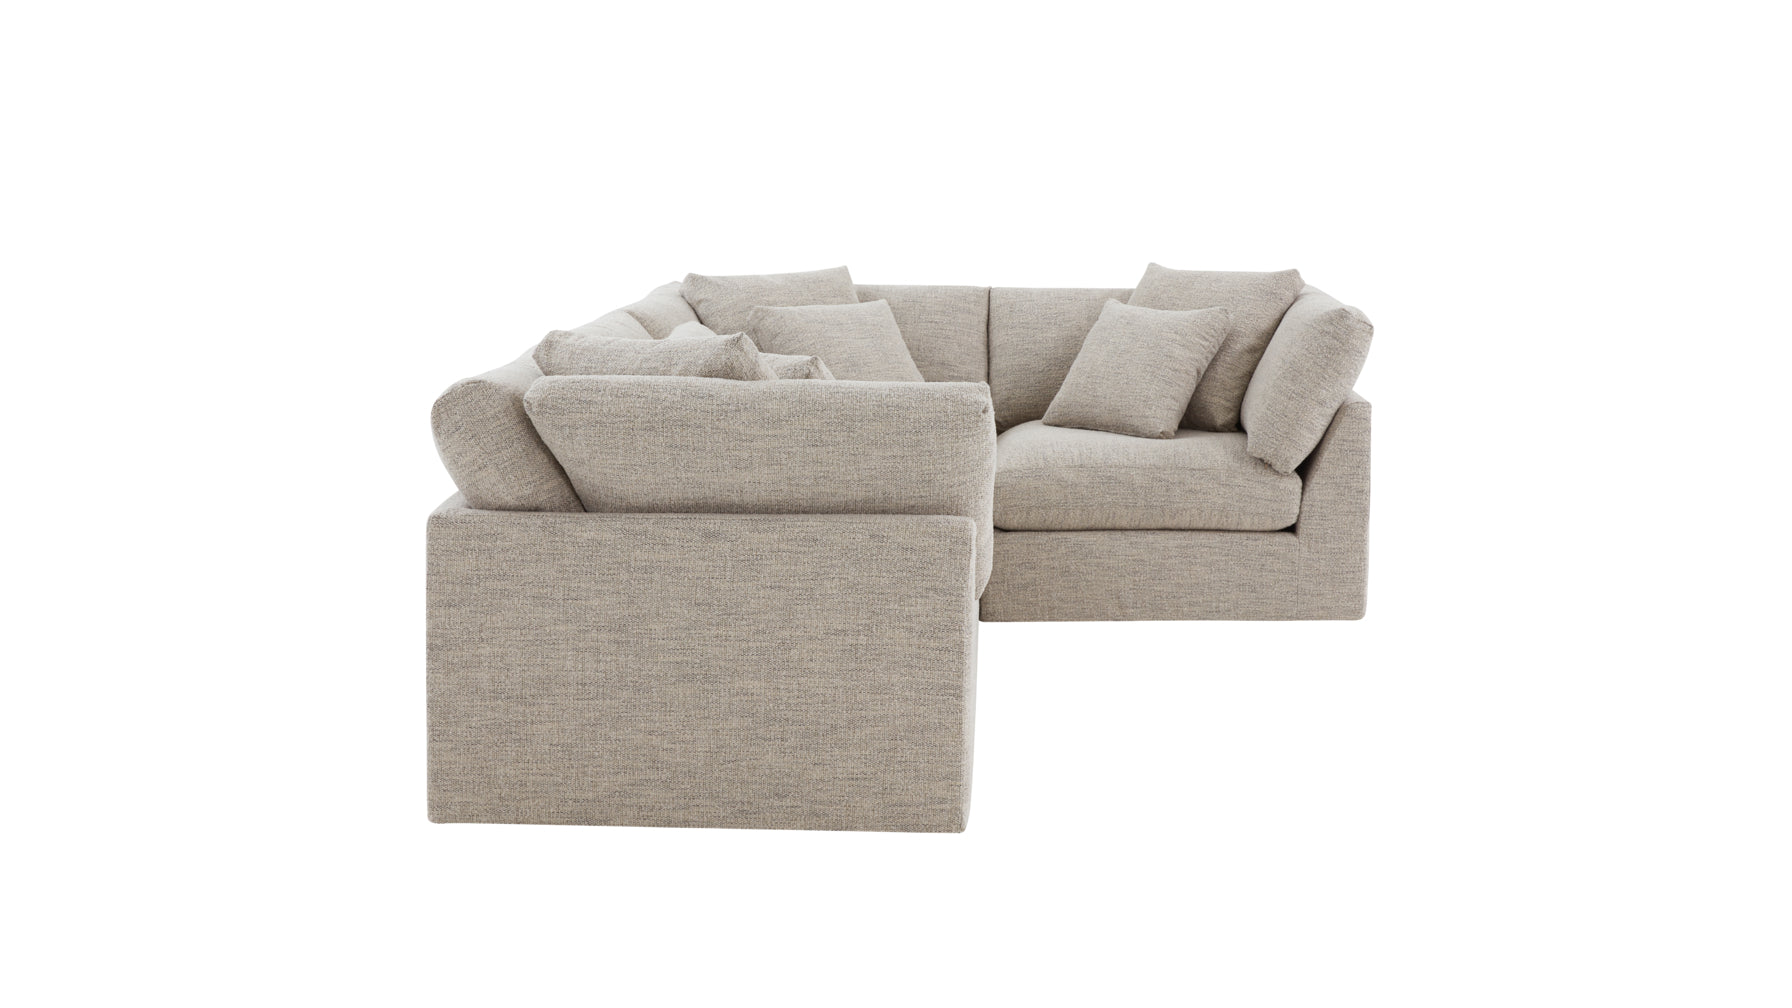 Get Together™ 4-Piece Modular Sectional Closed, Standard, Oatmeal - Image 5